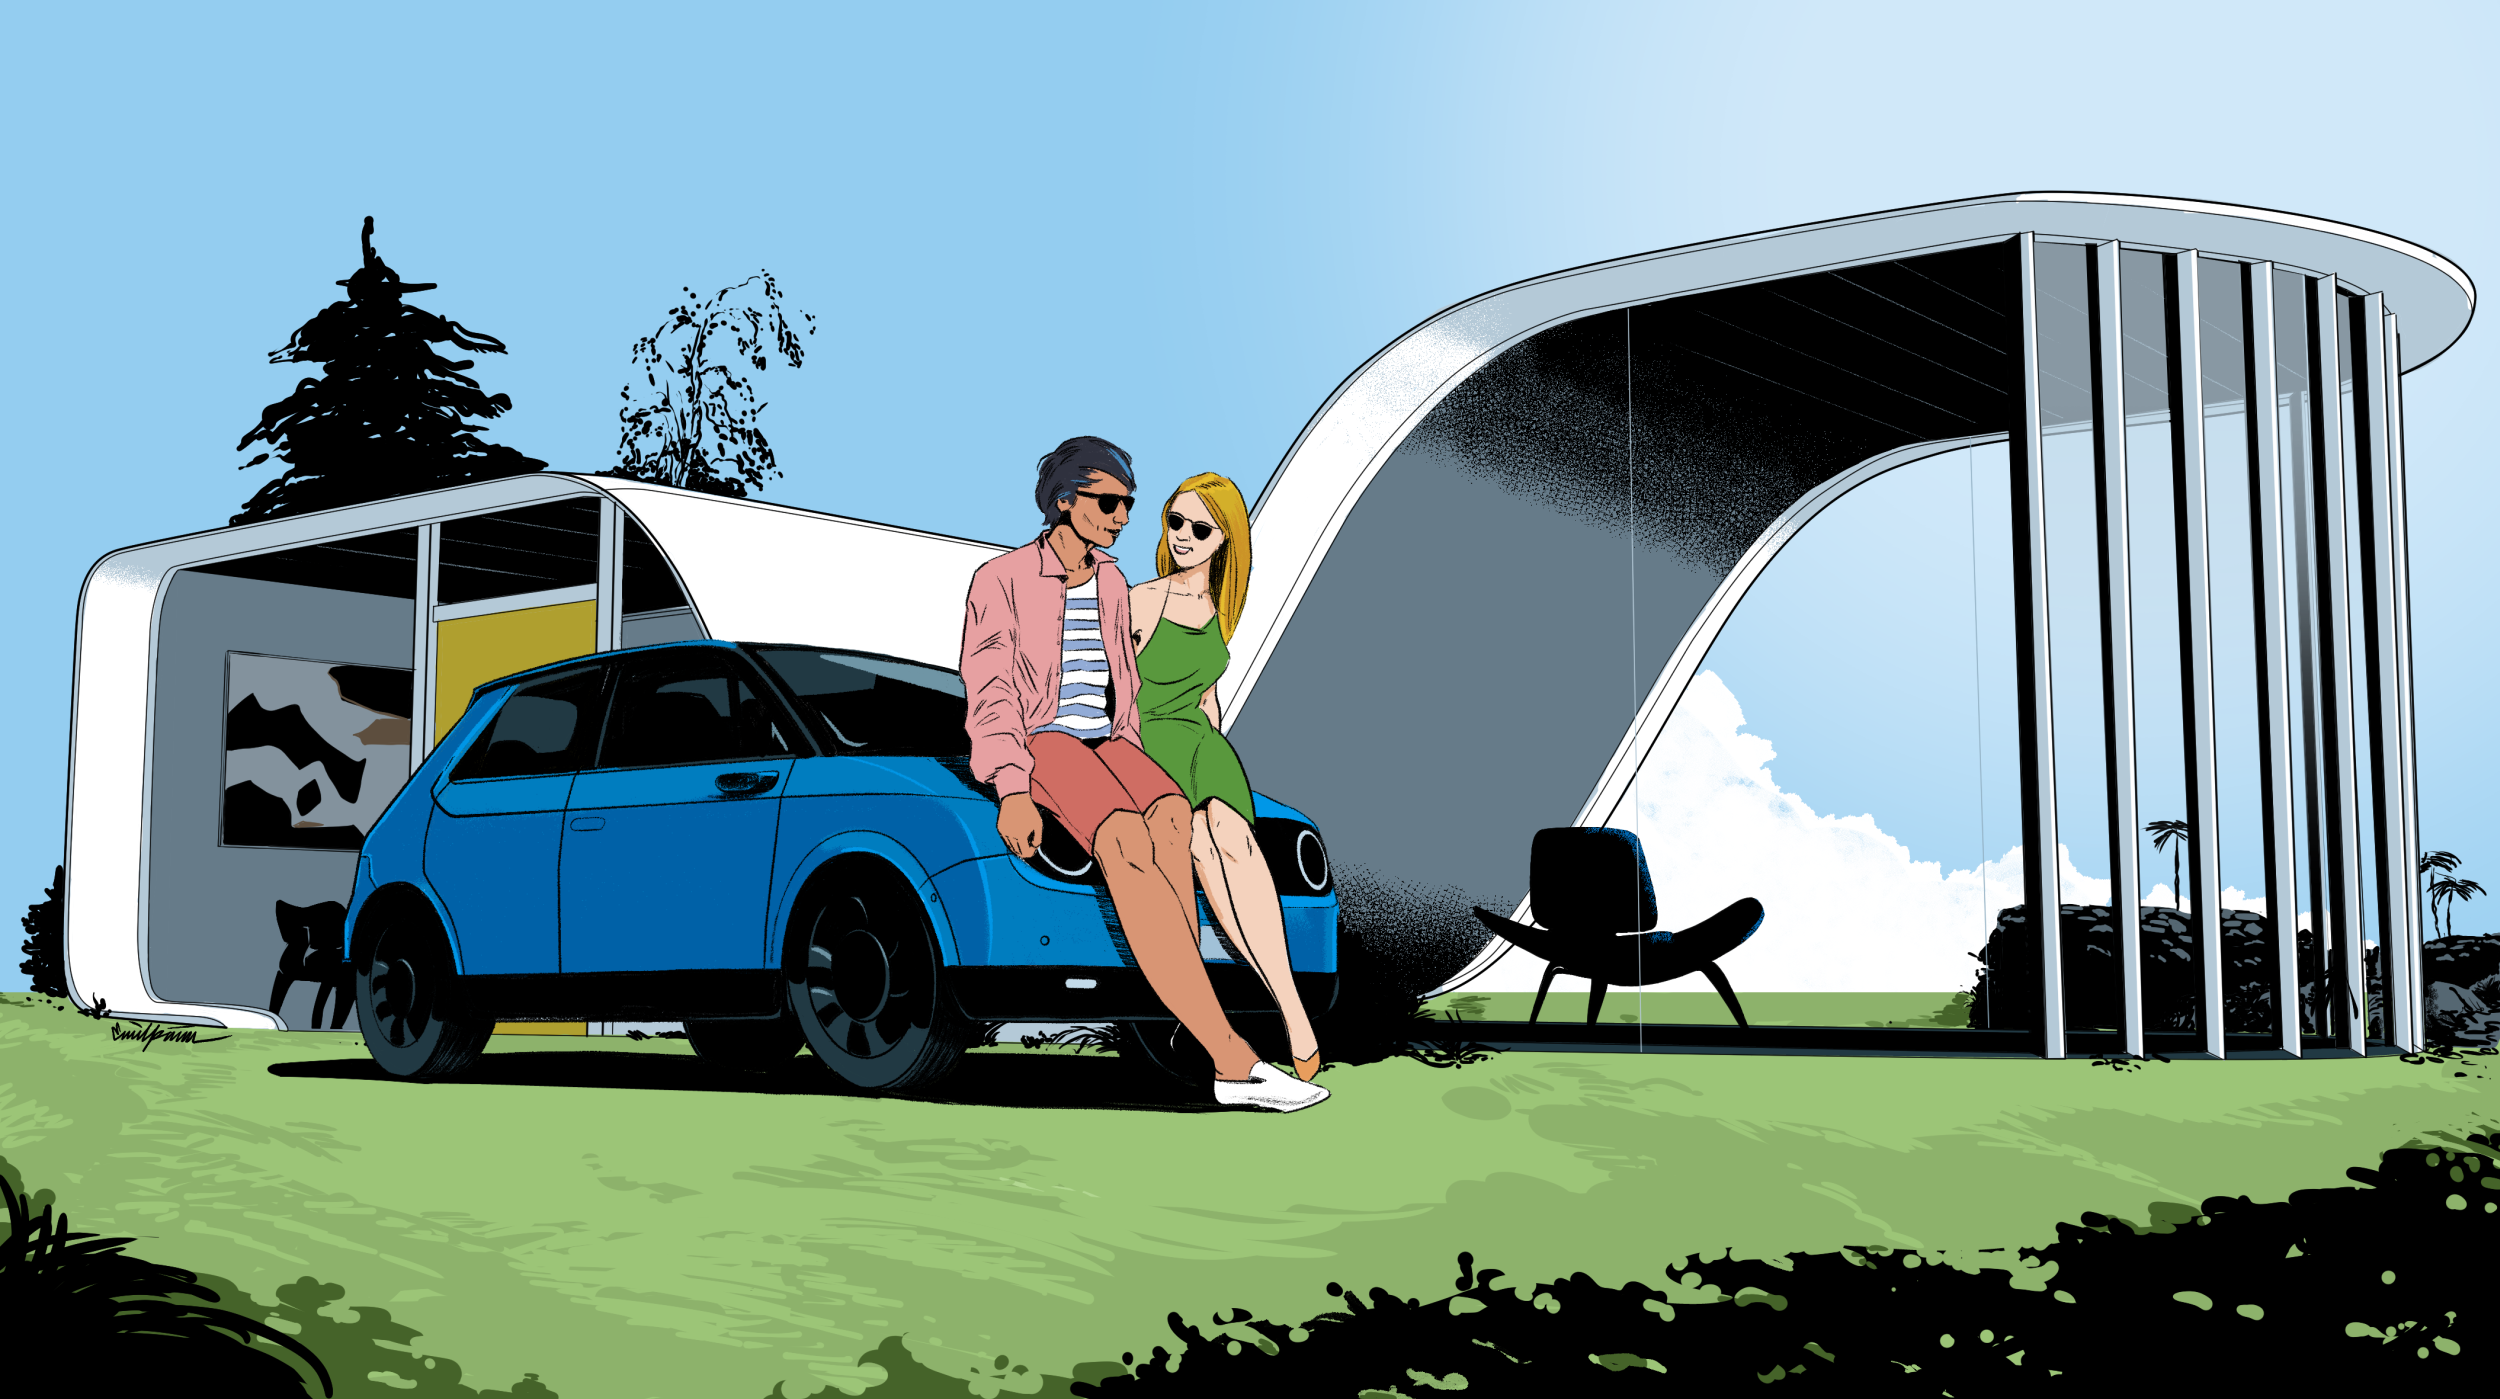 Bright summer day. Young couple having a conversation while leaning against the hood of a an electric car. The car is parked on the grass in front of a modern home. The house has a modern, futuristic shape. There are a couple of mid century furniture armchairs and a large canvas in one of the rooms. Through the glazing you can see the back garden featuring planting and a rock wall.